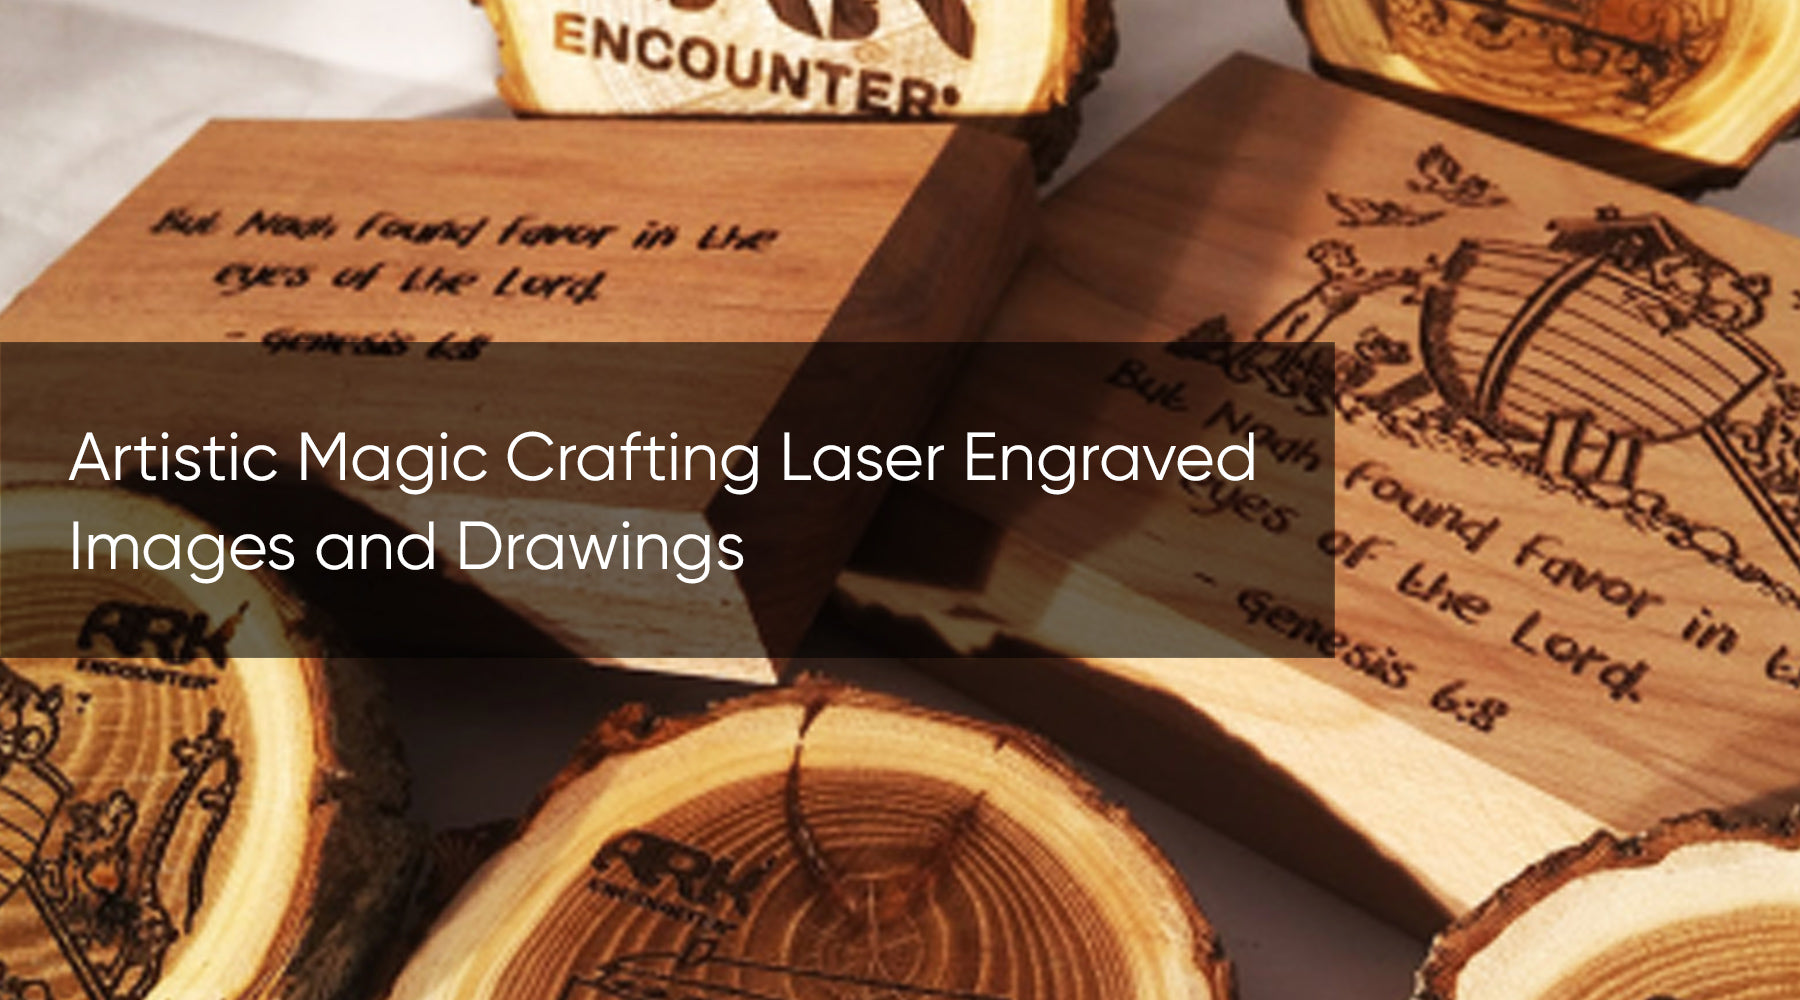 Artistic Magic Crafting Laser Engraved Images and Drawings